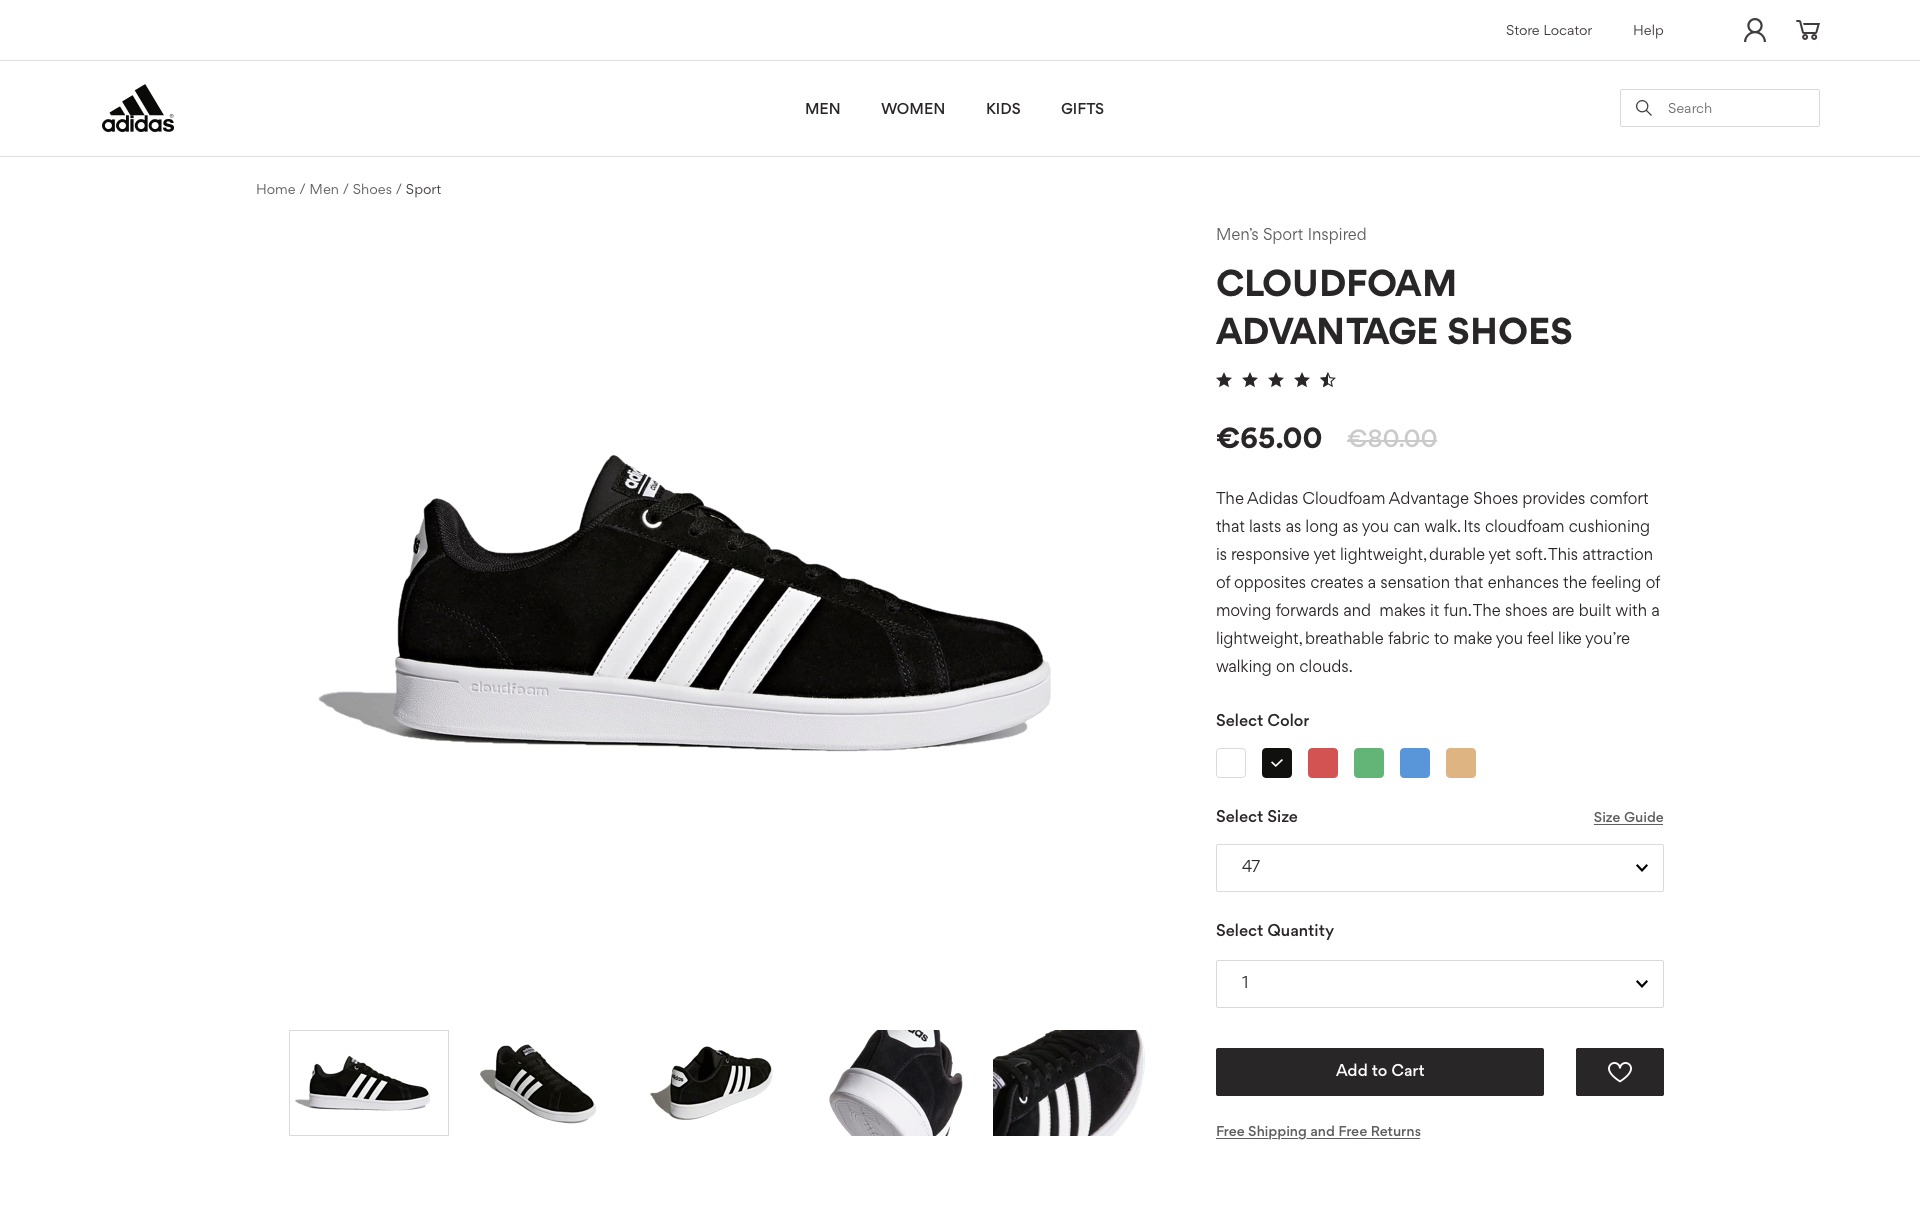 Adidas product page